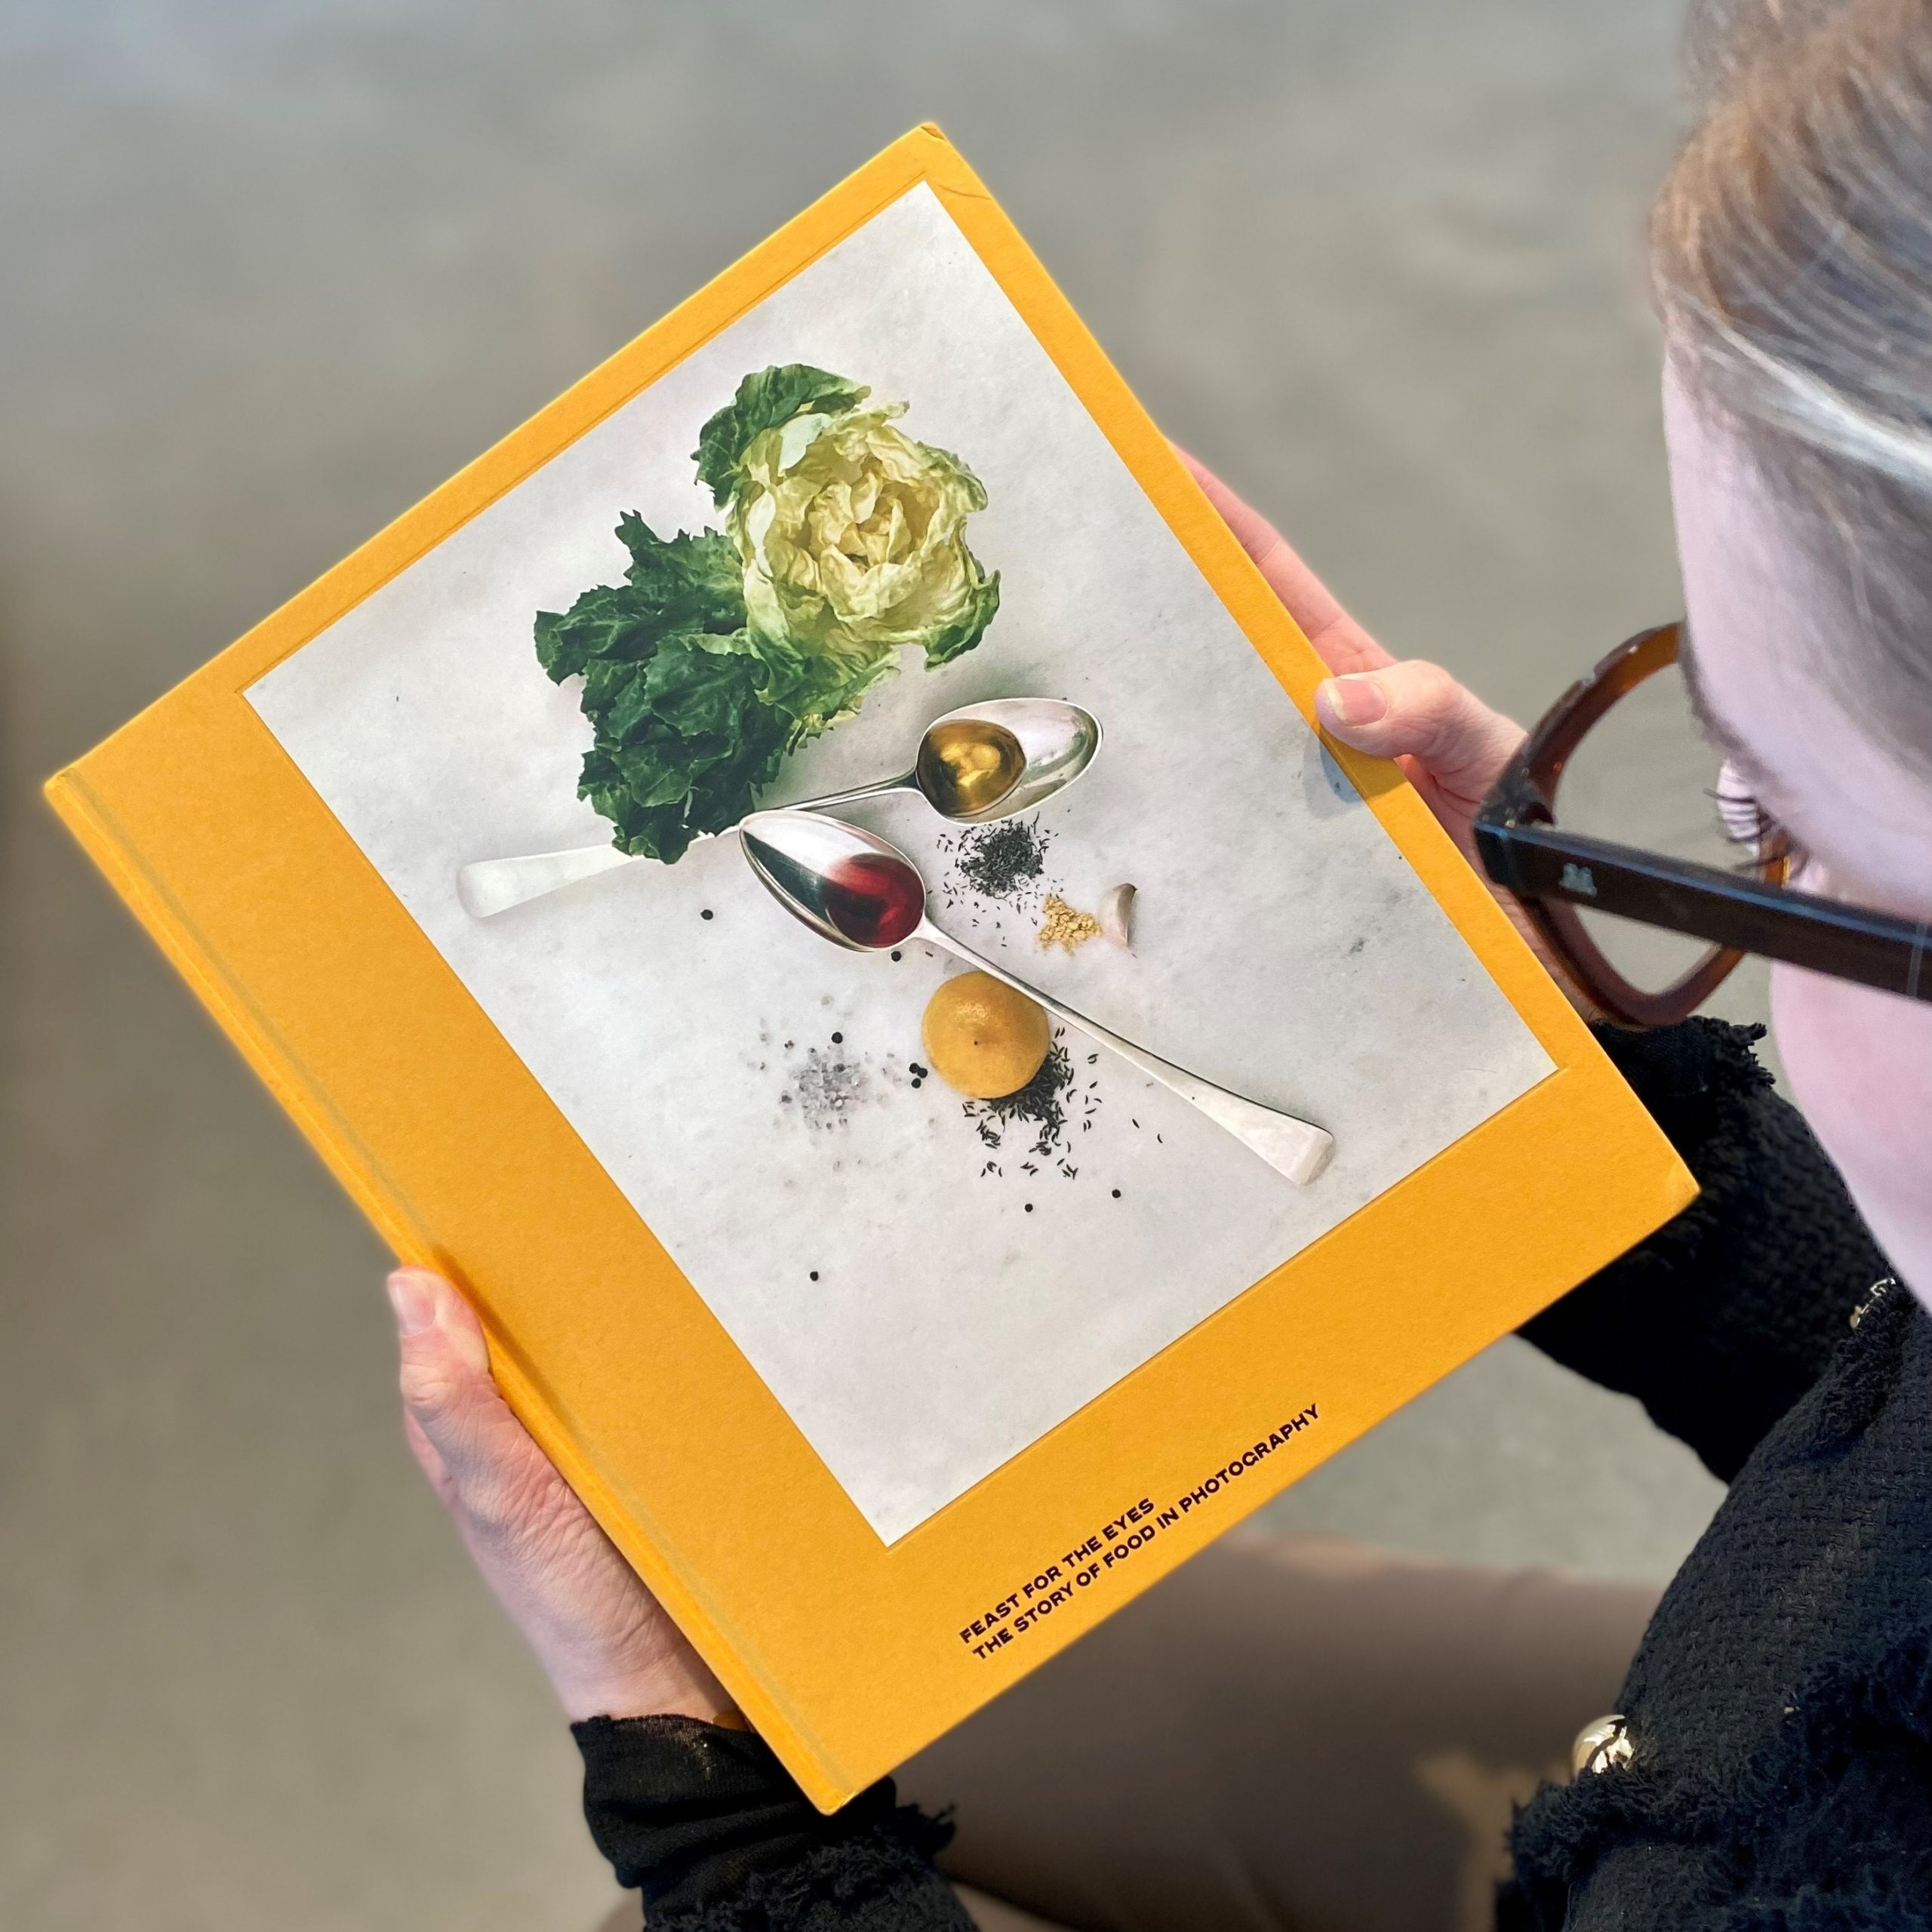 Book cover of "Feast for the Eyes: The story: The Story of Food in Photography"